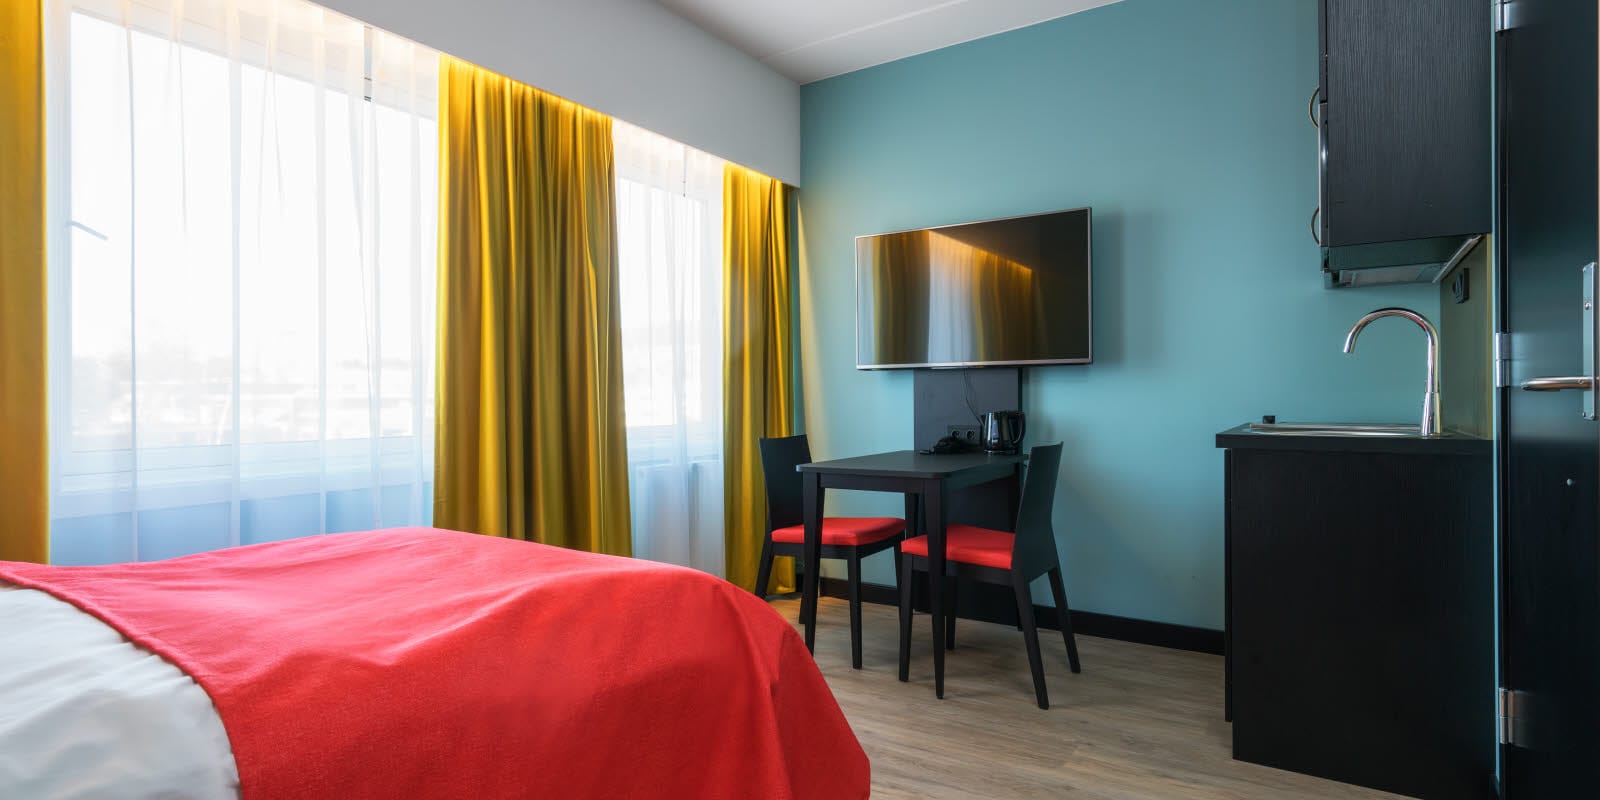 Double bed, smart TV and kitchen table in 1-room apartment at Thon Hotel Linne Apartments